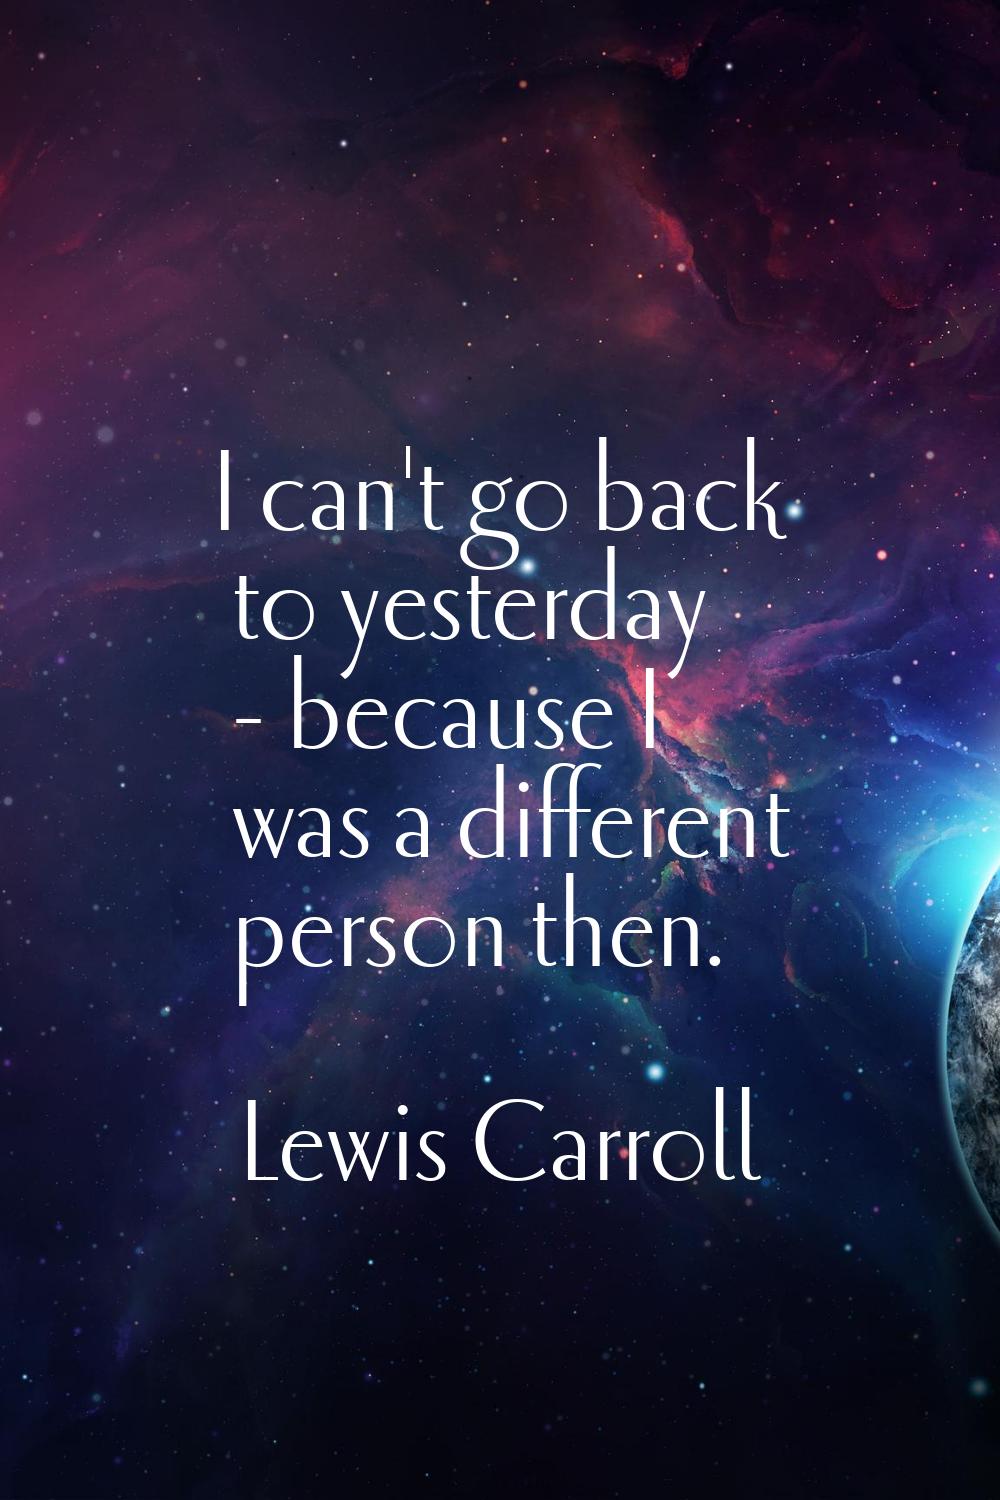 I can't go back to yesterday - because I was a different person then.